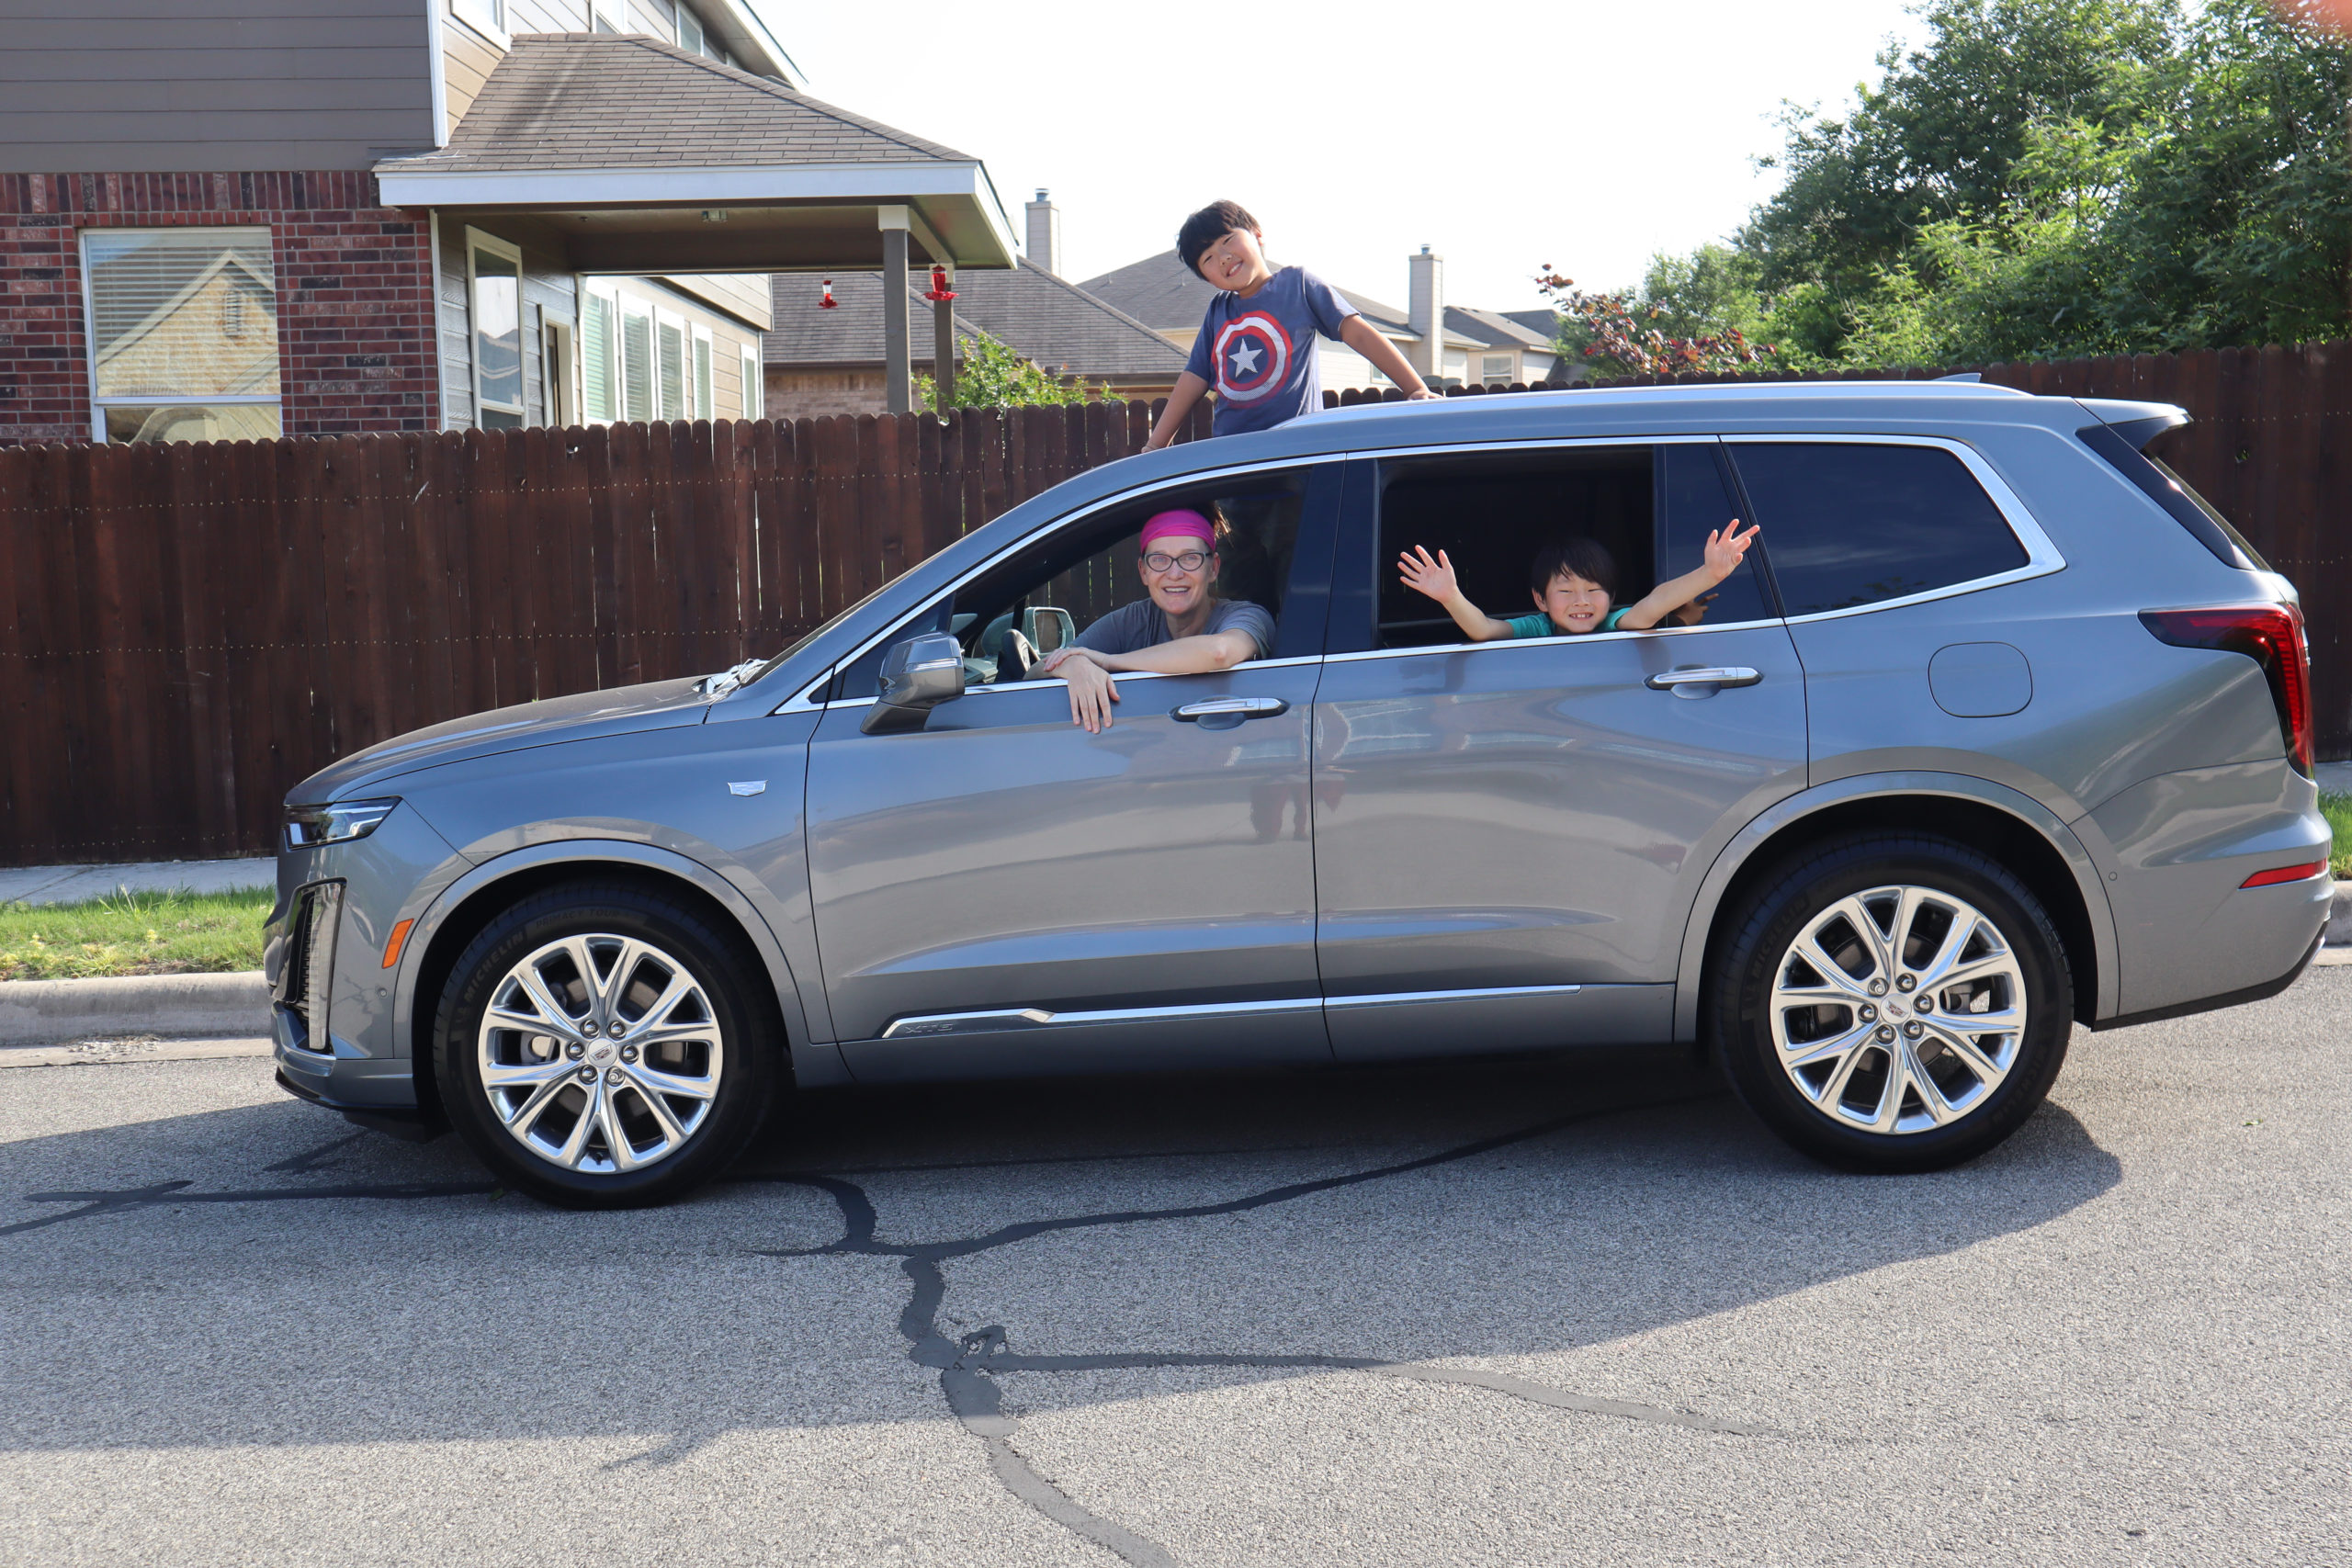 Cadillac XT6 with kiddos hanging out the sun room and back seat window